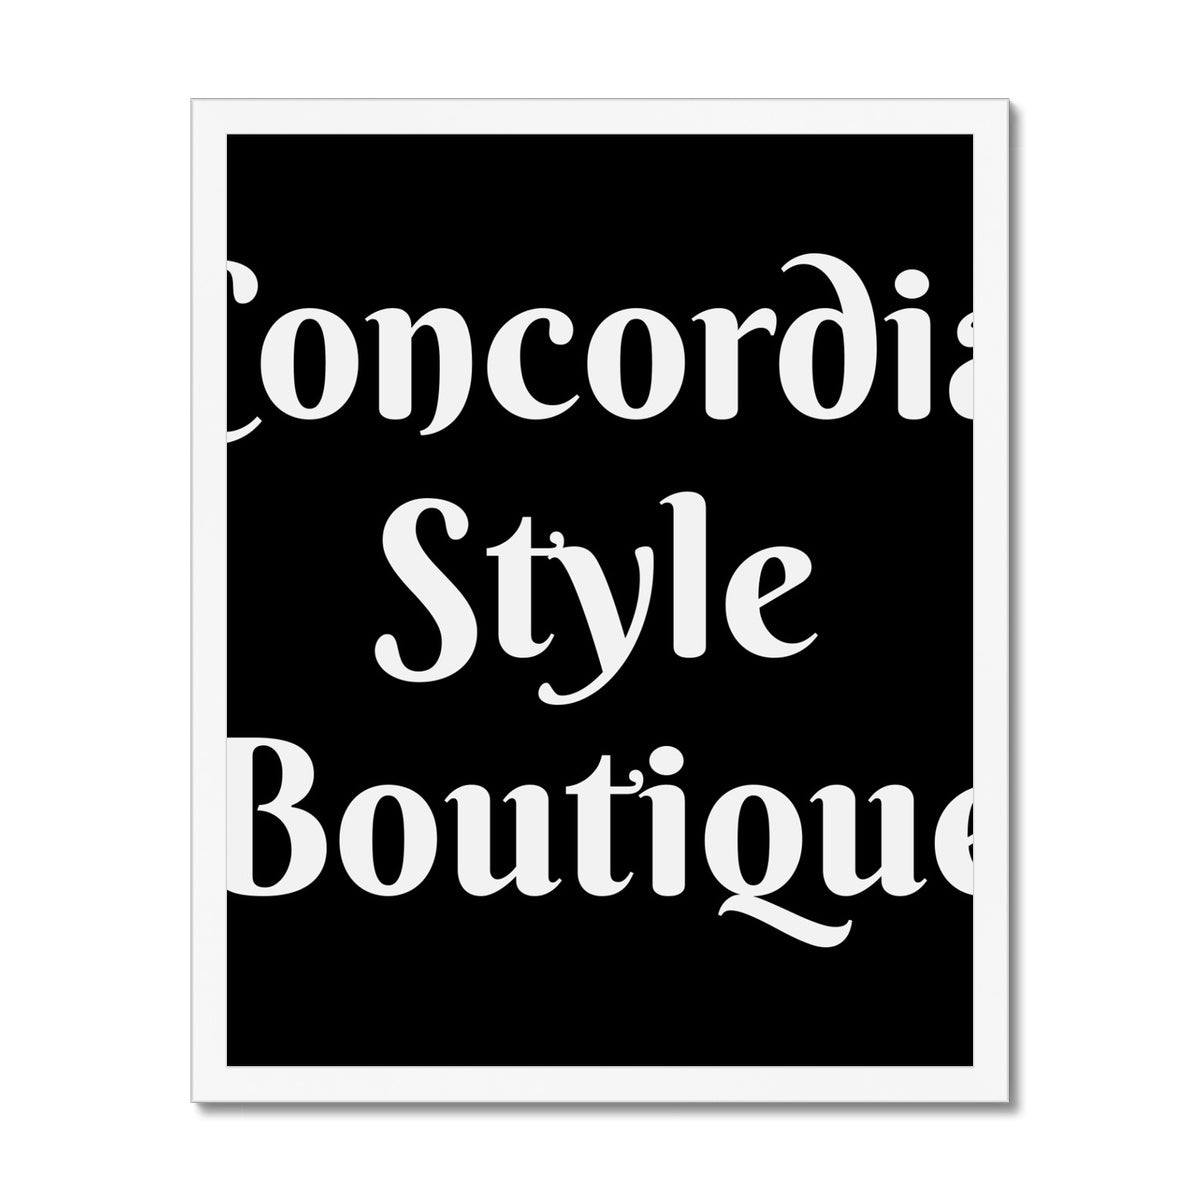 Concordia Style Boutique Budget Framed Poster